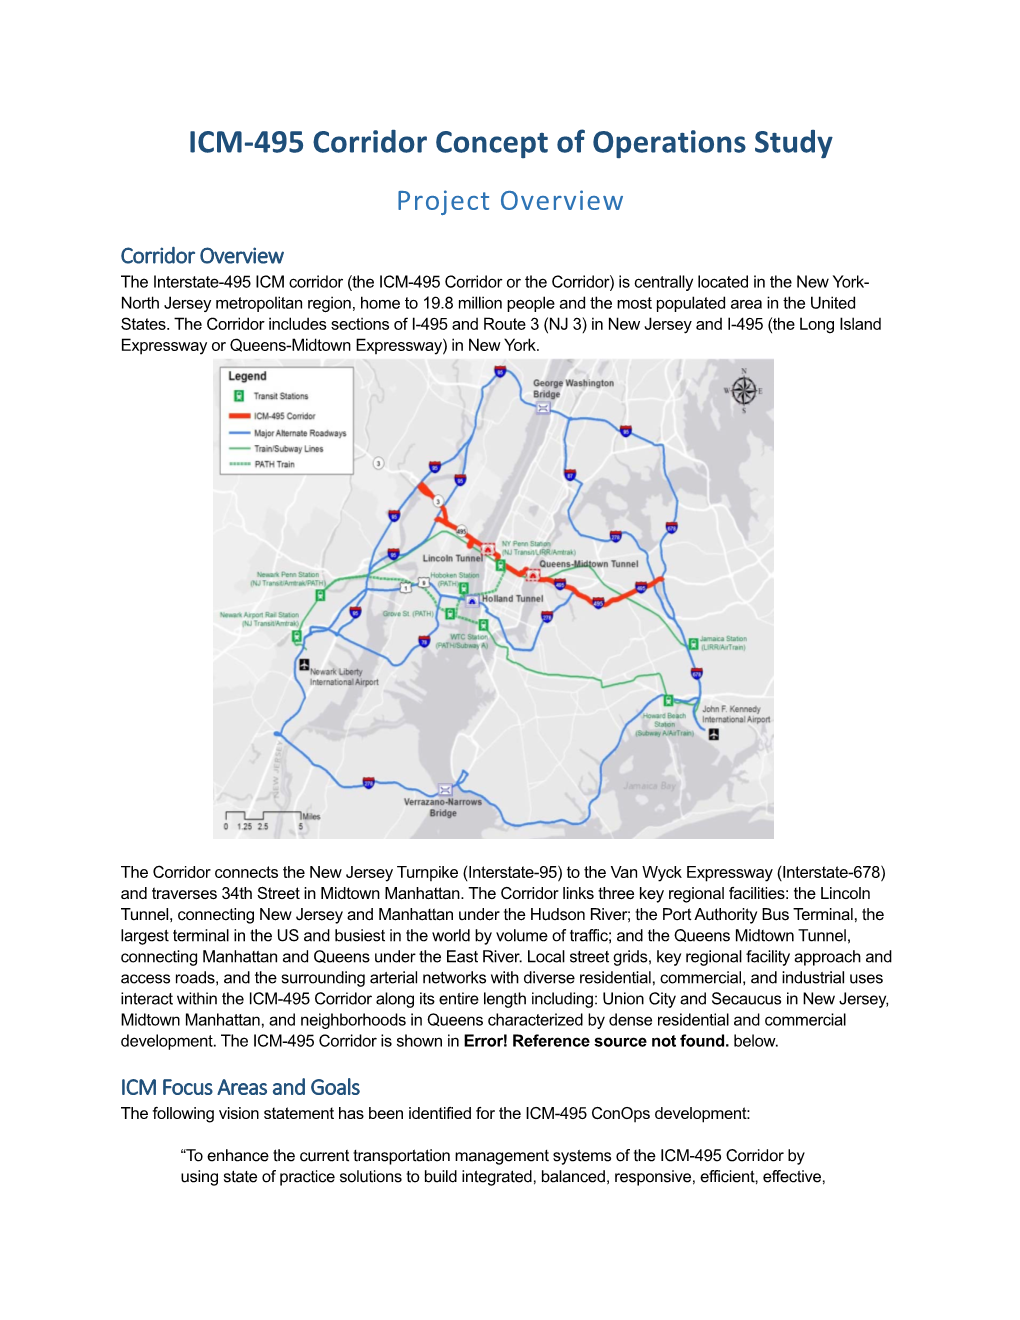 ICM-495 Corridor Concept of Operations Study Project Overview